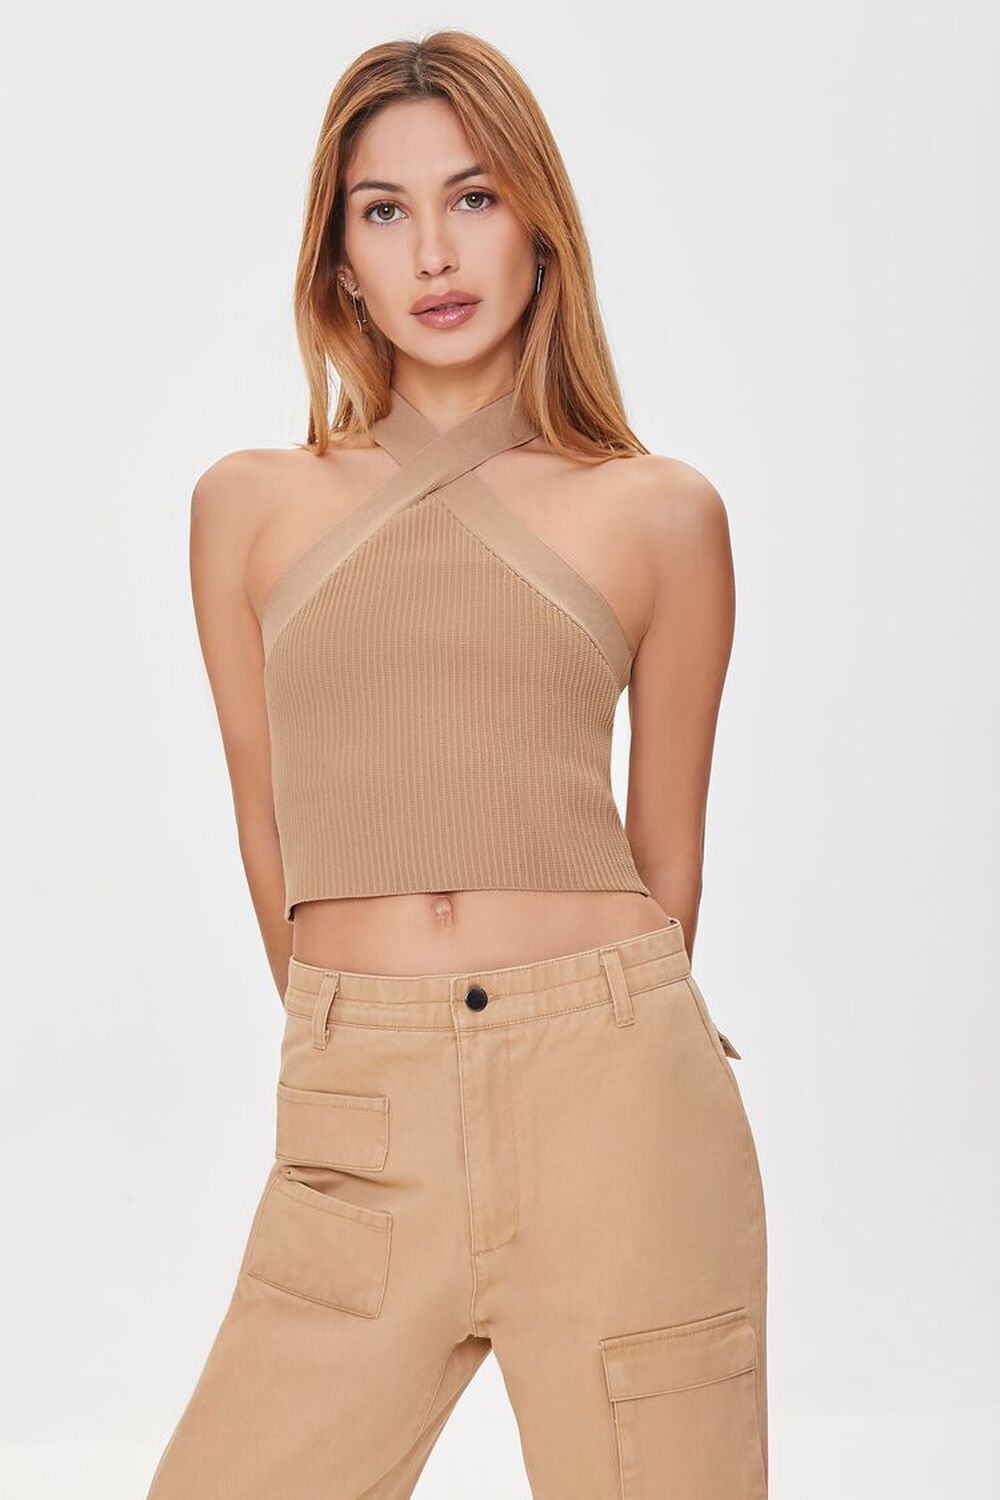 CAPPUCCINO Sweater-Knit Halter Crop Top, image 1